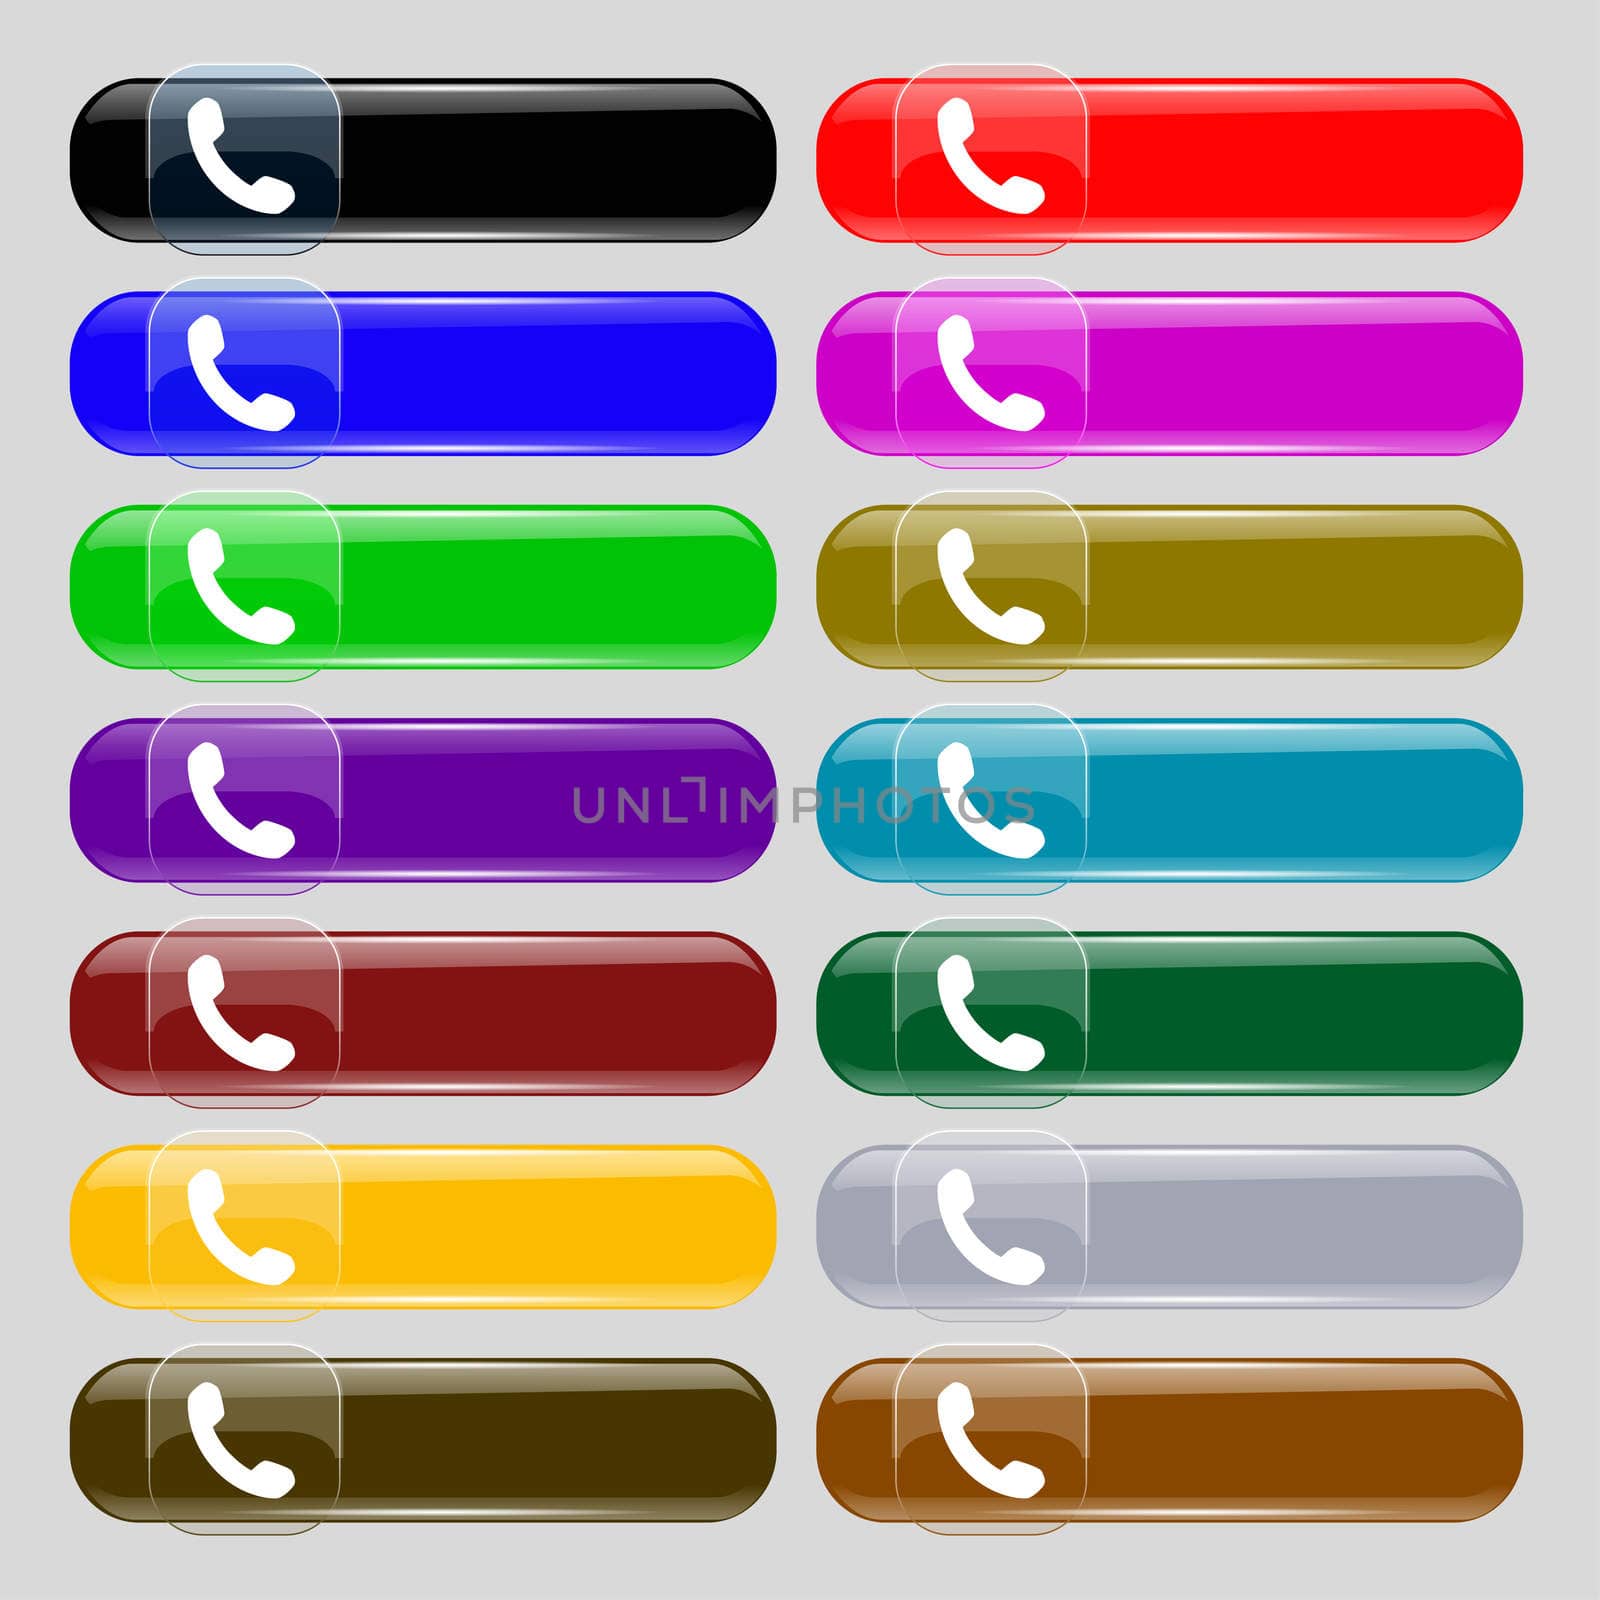 Phone, Support, Call center icon sign. Set from fourteen multi-colored glass buttons with place for text. illustration